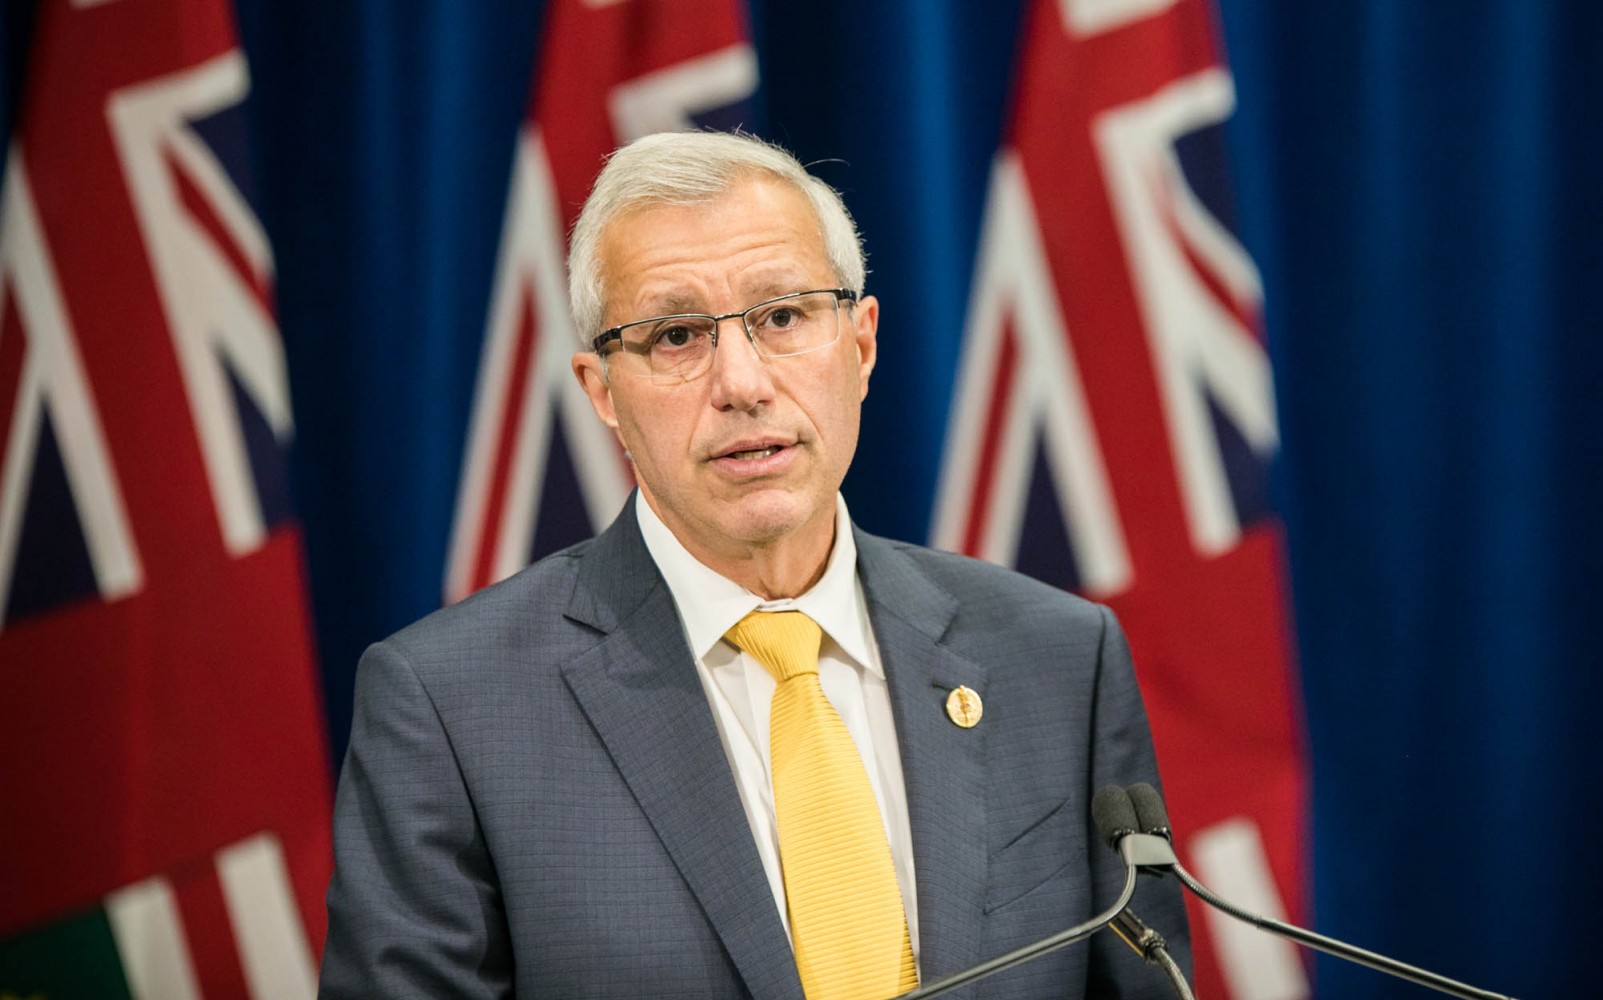 Vic Fedeli moves to sue Mayor Patrick Brown over claims made in Take Down memoir